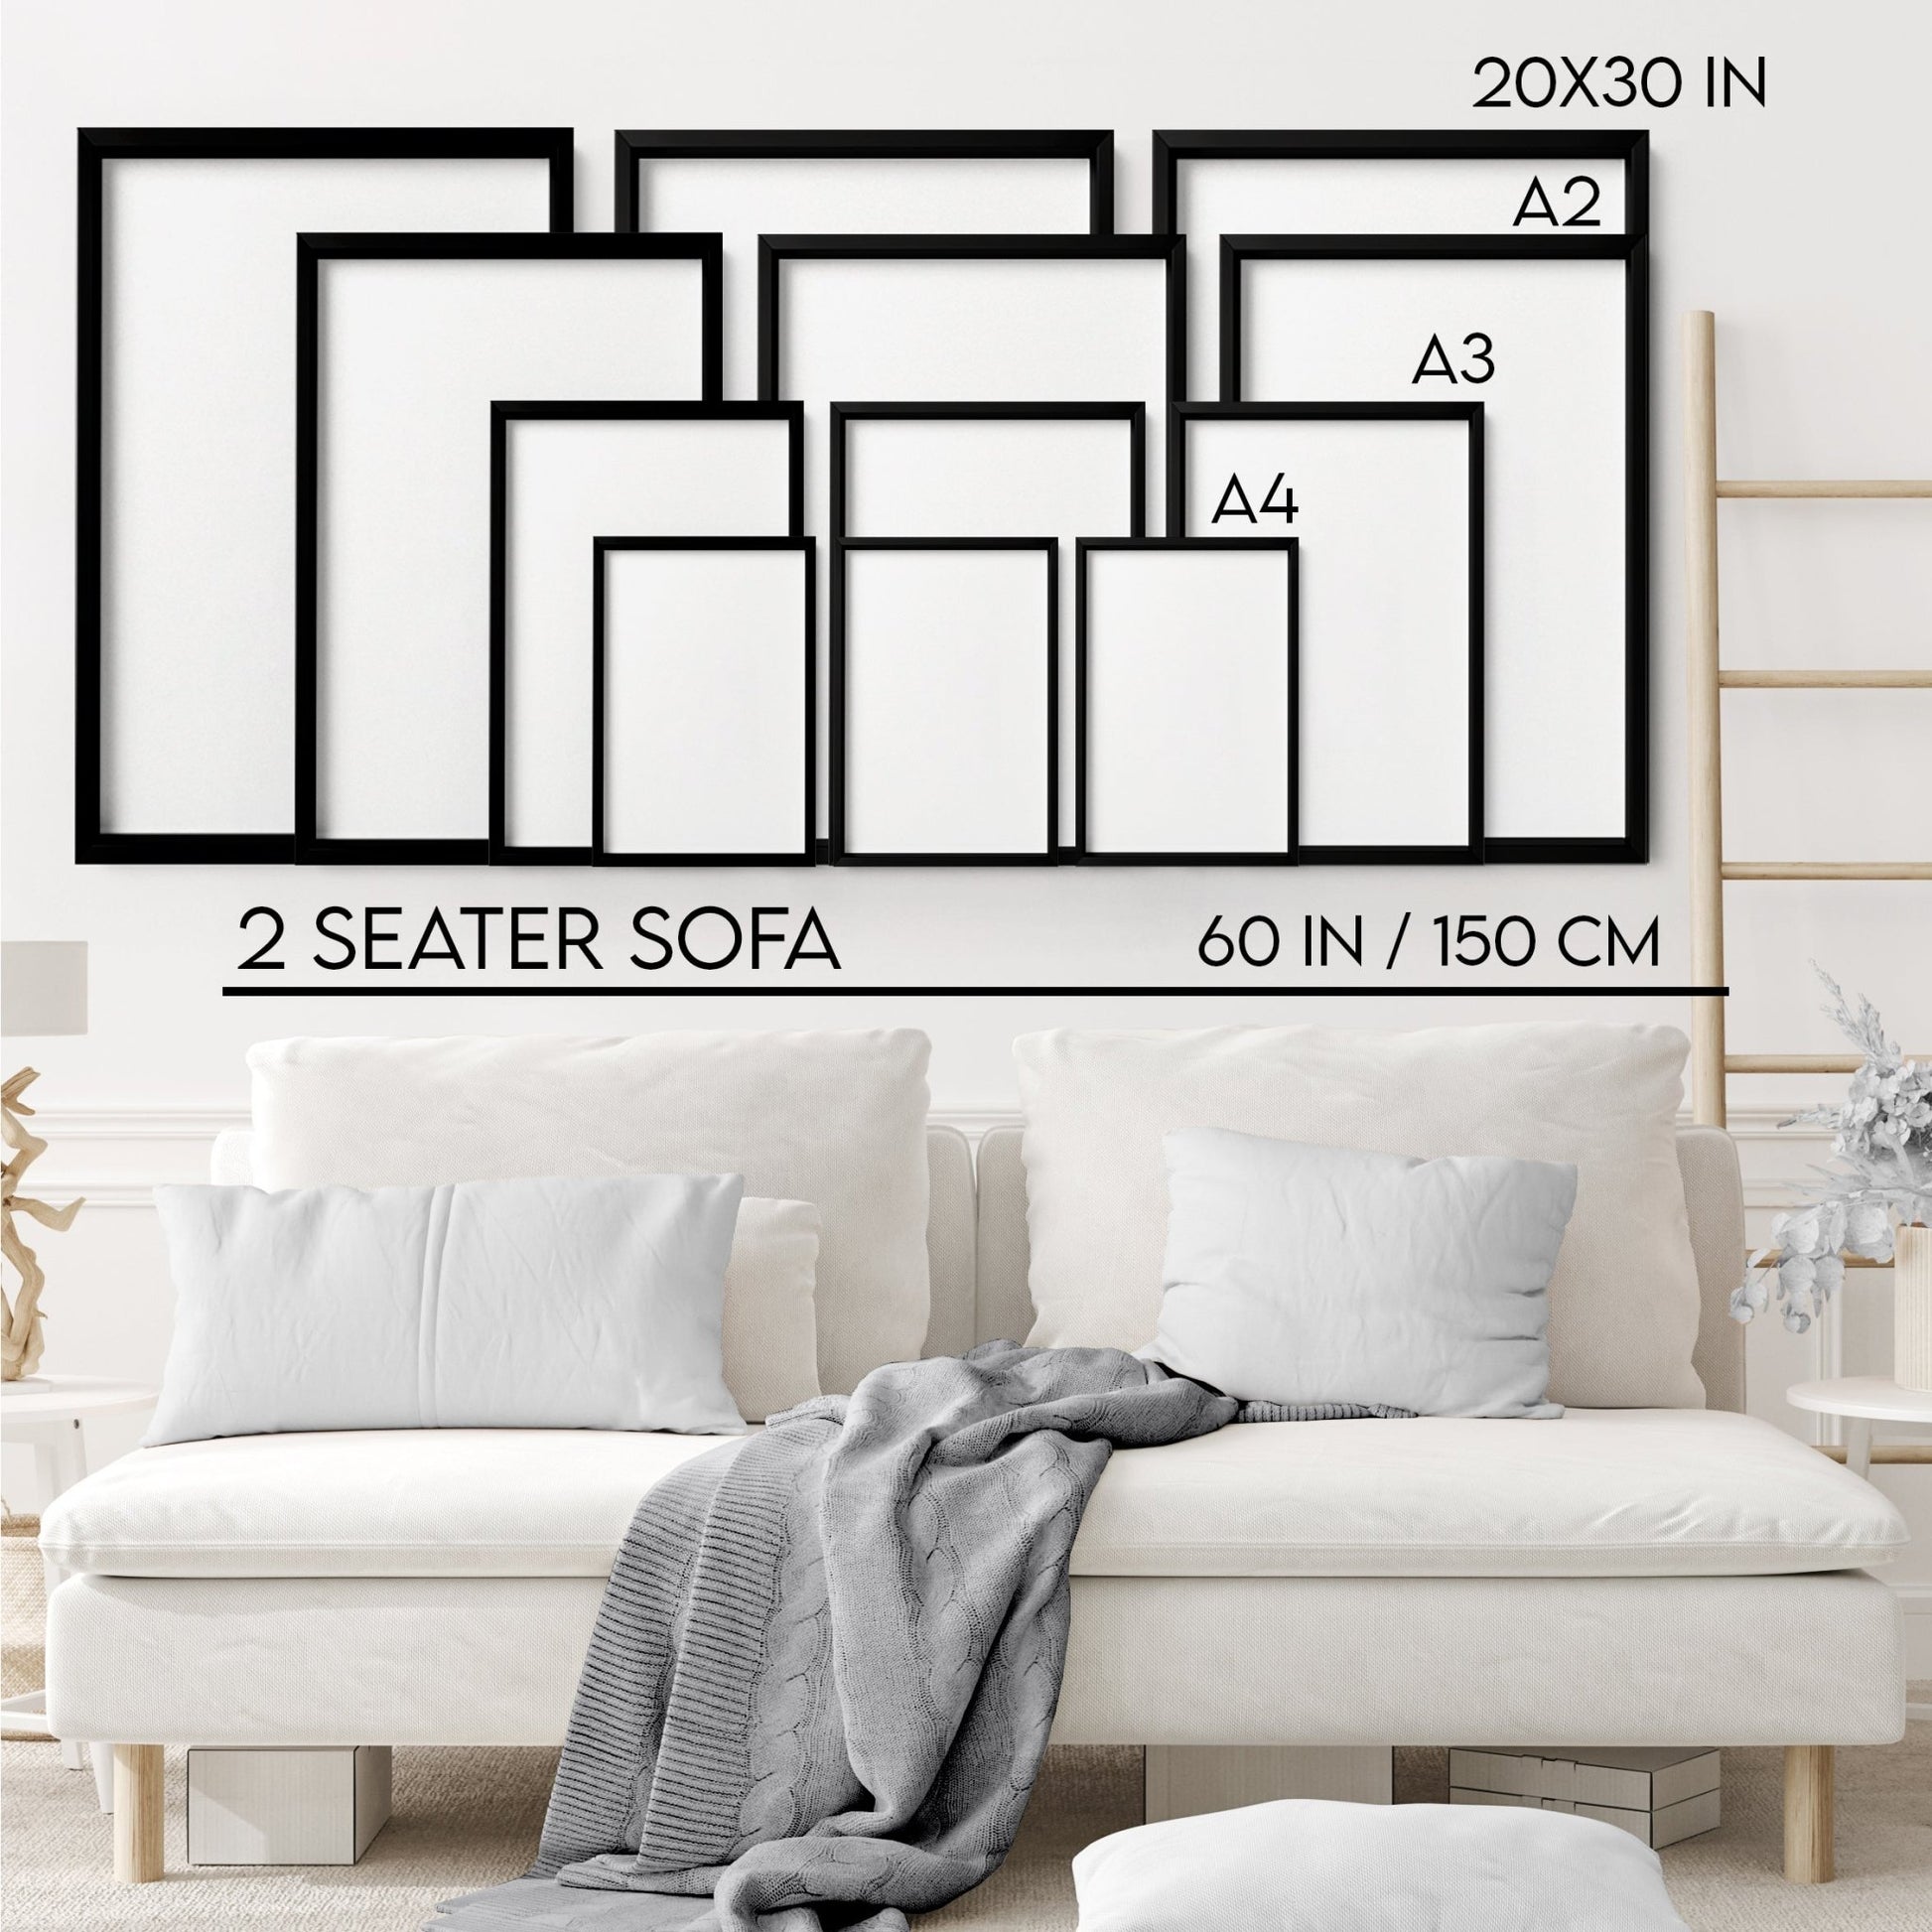 Scandinavian decor style for living room | set of 3 wall art prints - About Wall Art